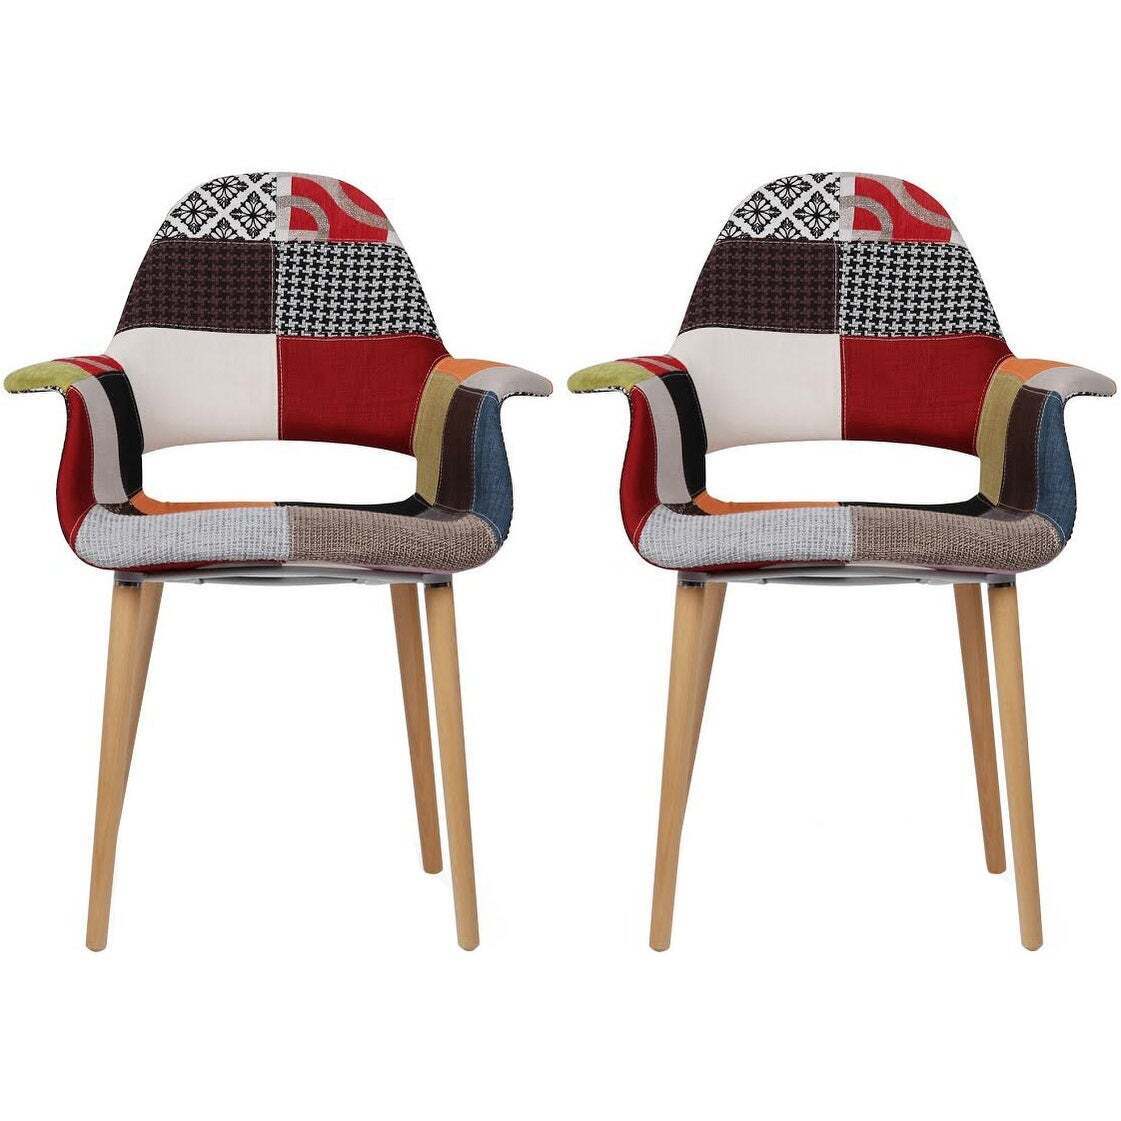 High Open Back Patchwork Chairs